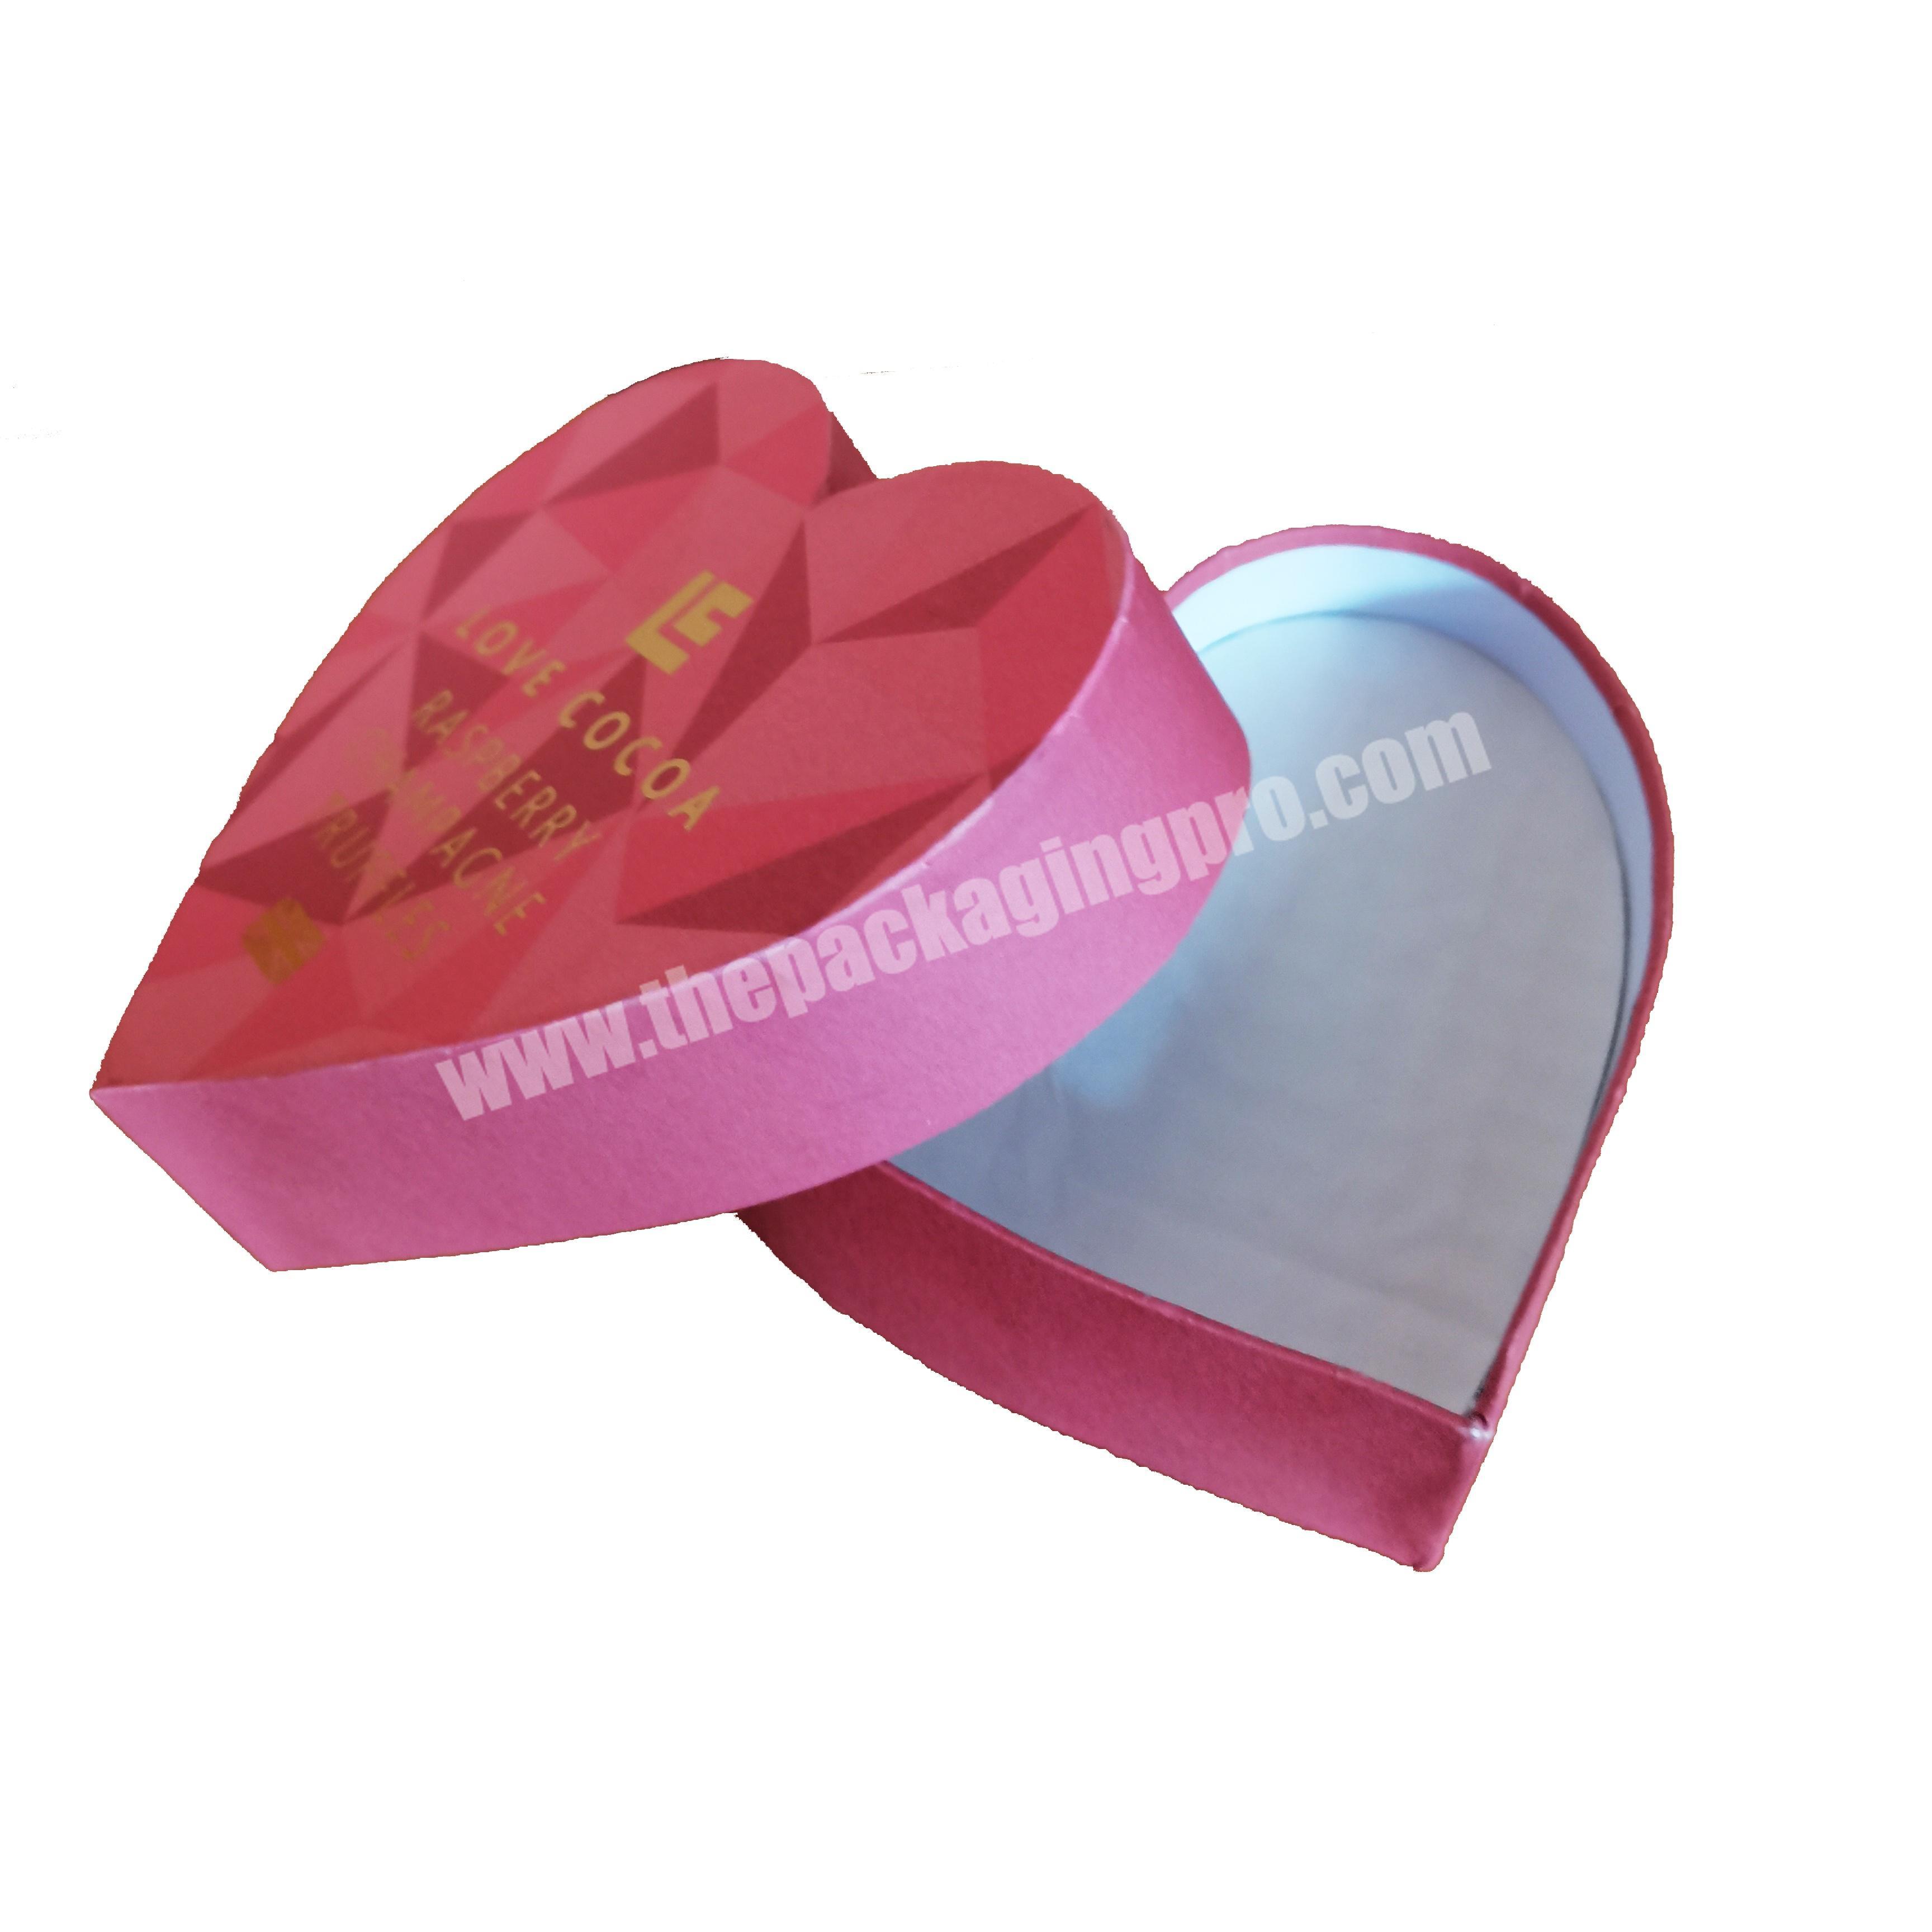 cusmtom pink creative empty round and heart shape chocolate gift packaging box